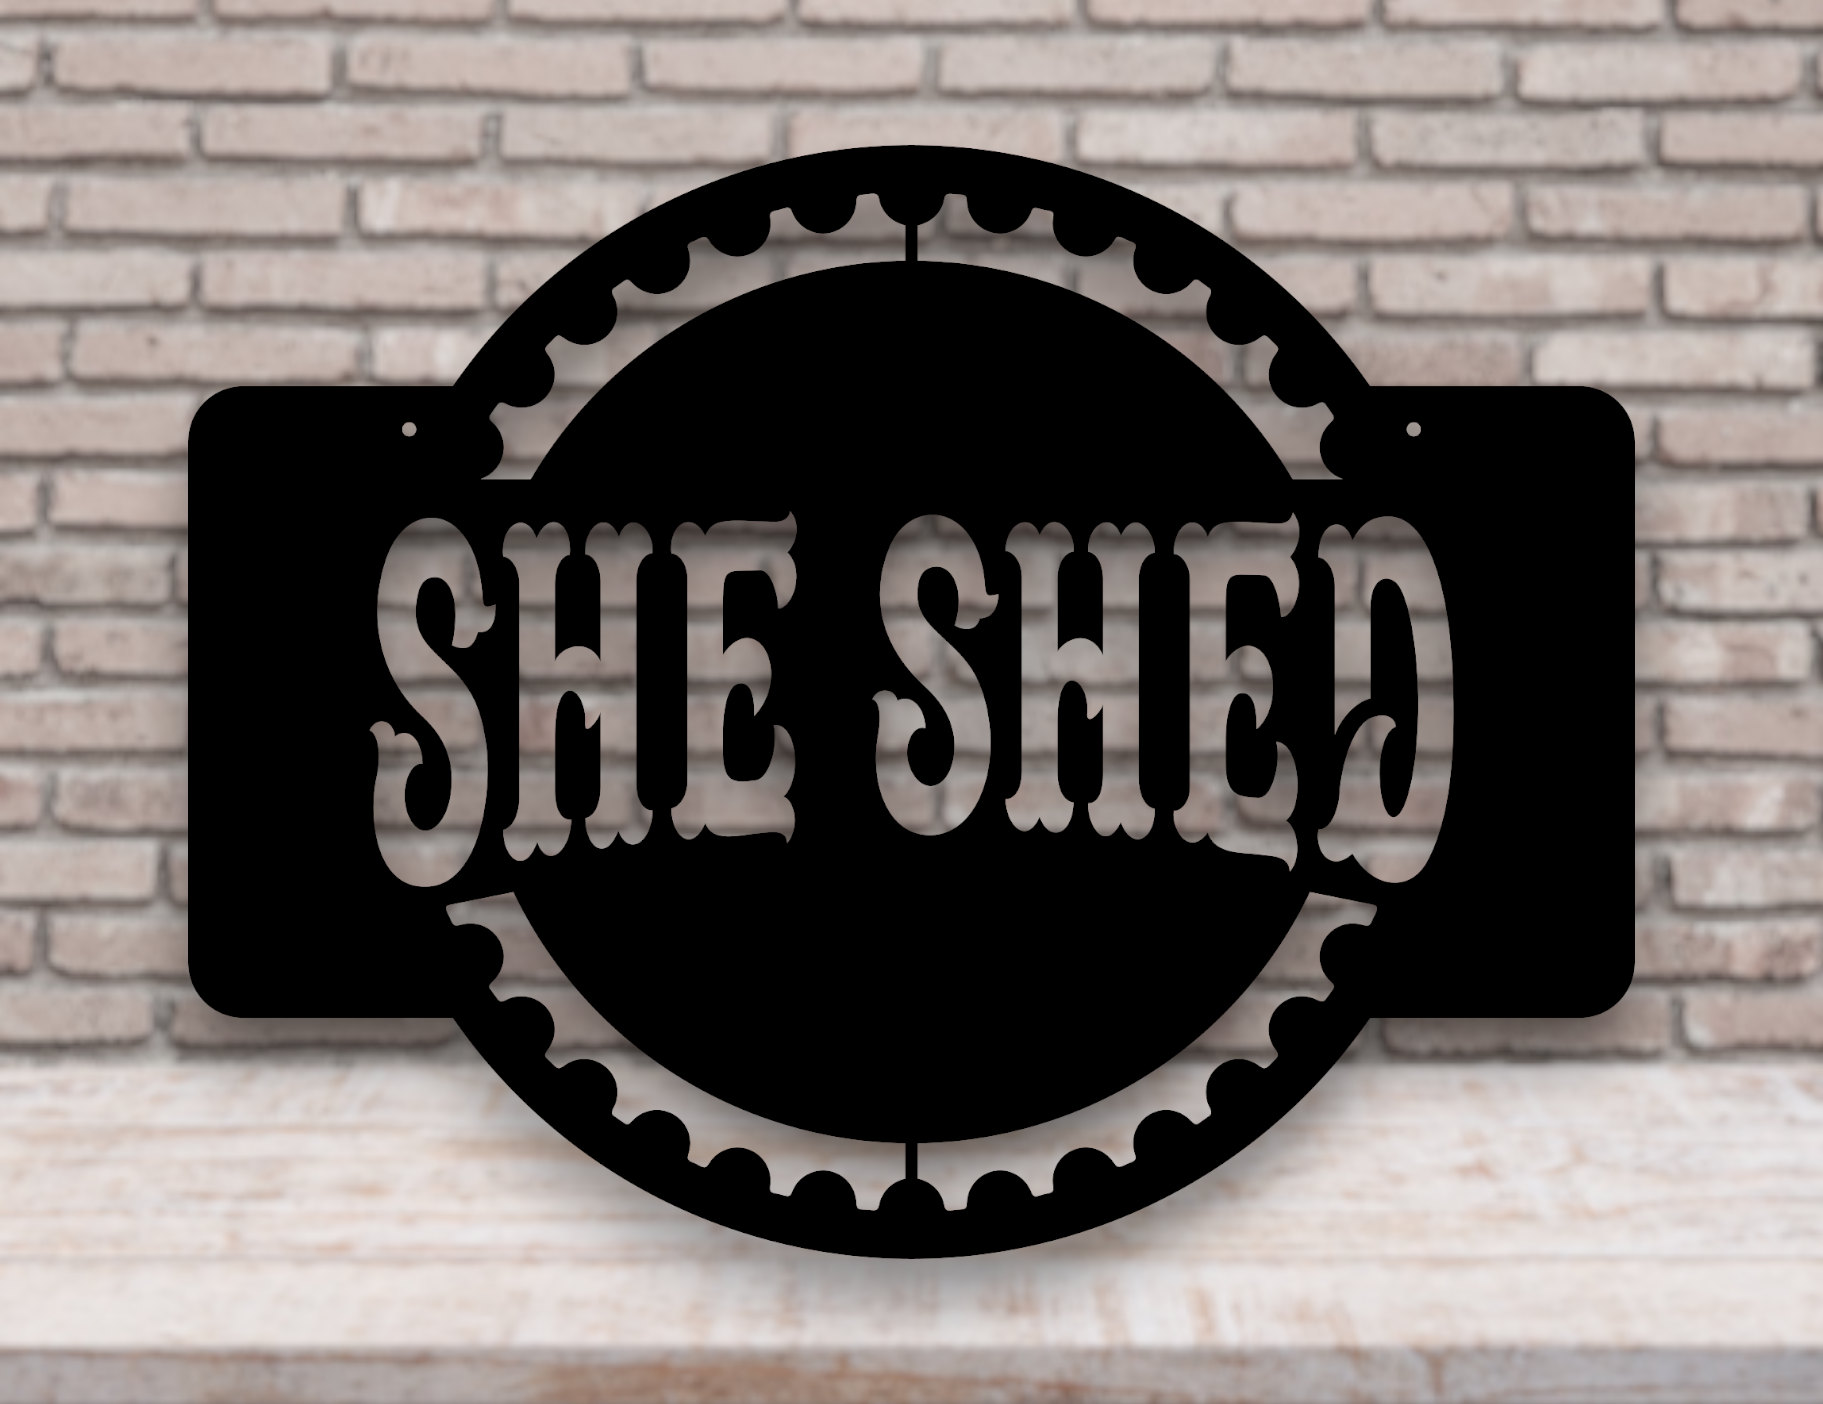 she shed with gear border metal sign